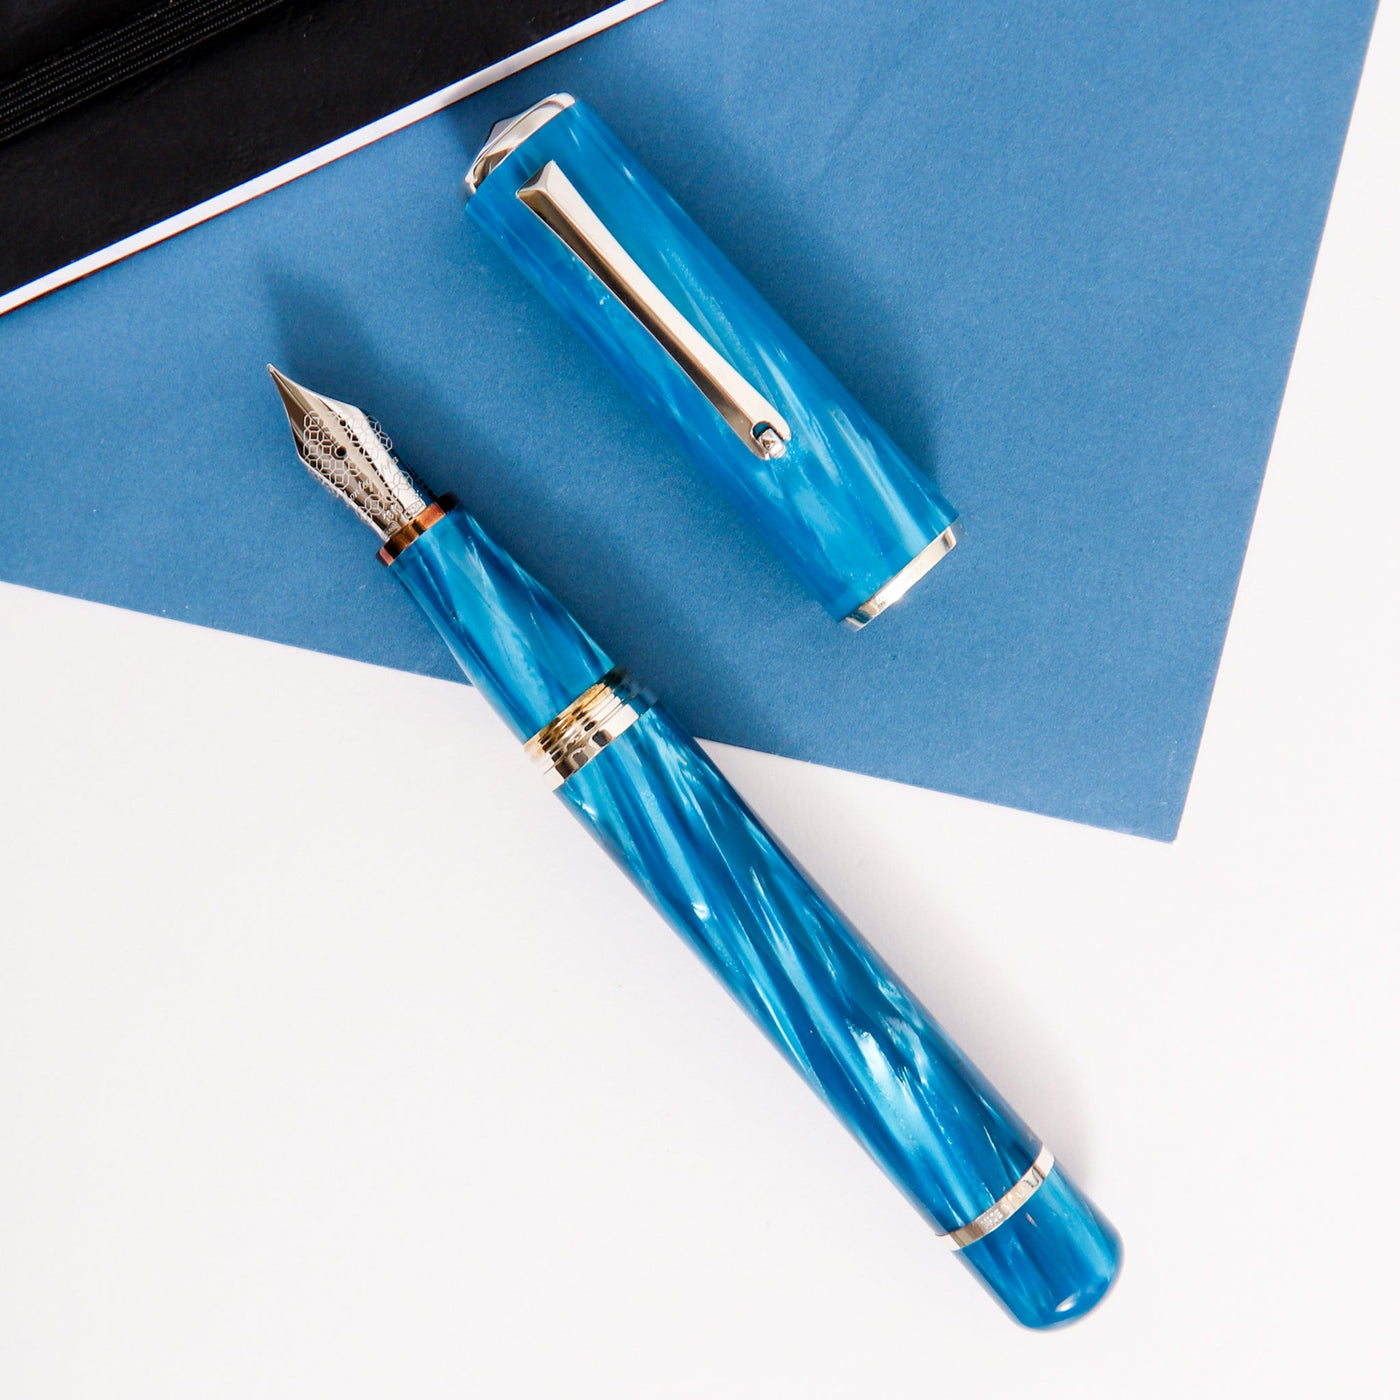 Montegrappa-Masters-Arte-Turquoise-Celluloid-Fountain-Pen-With-Silver-Trim